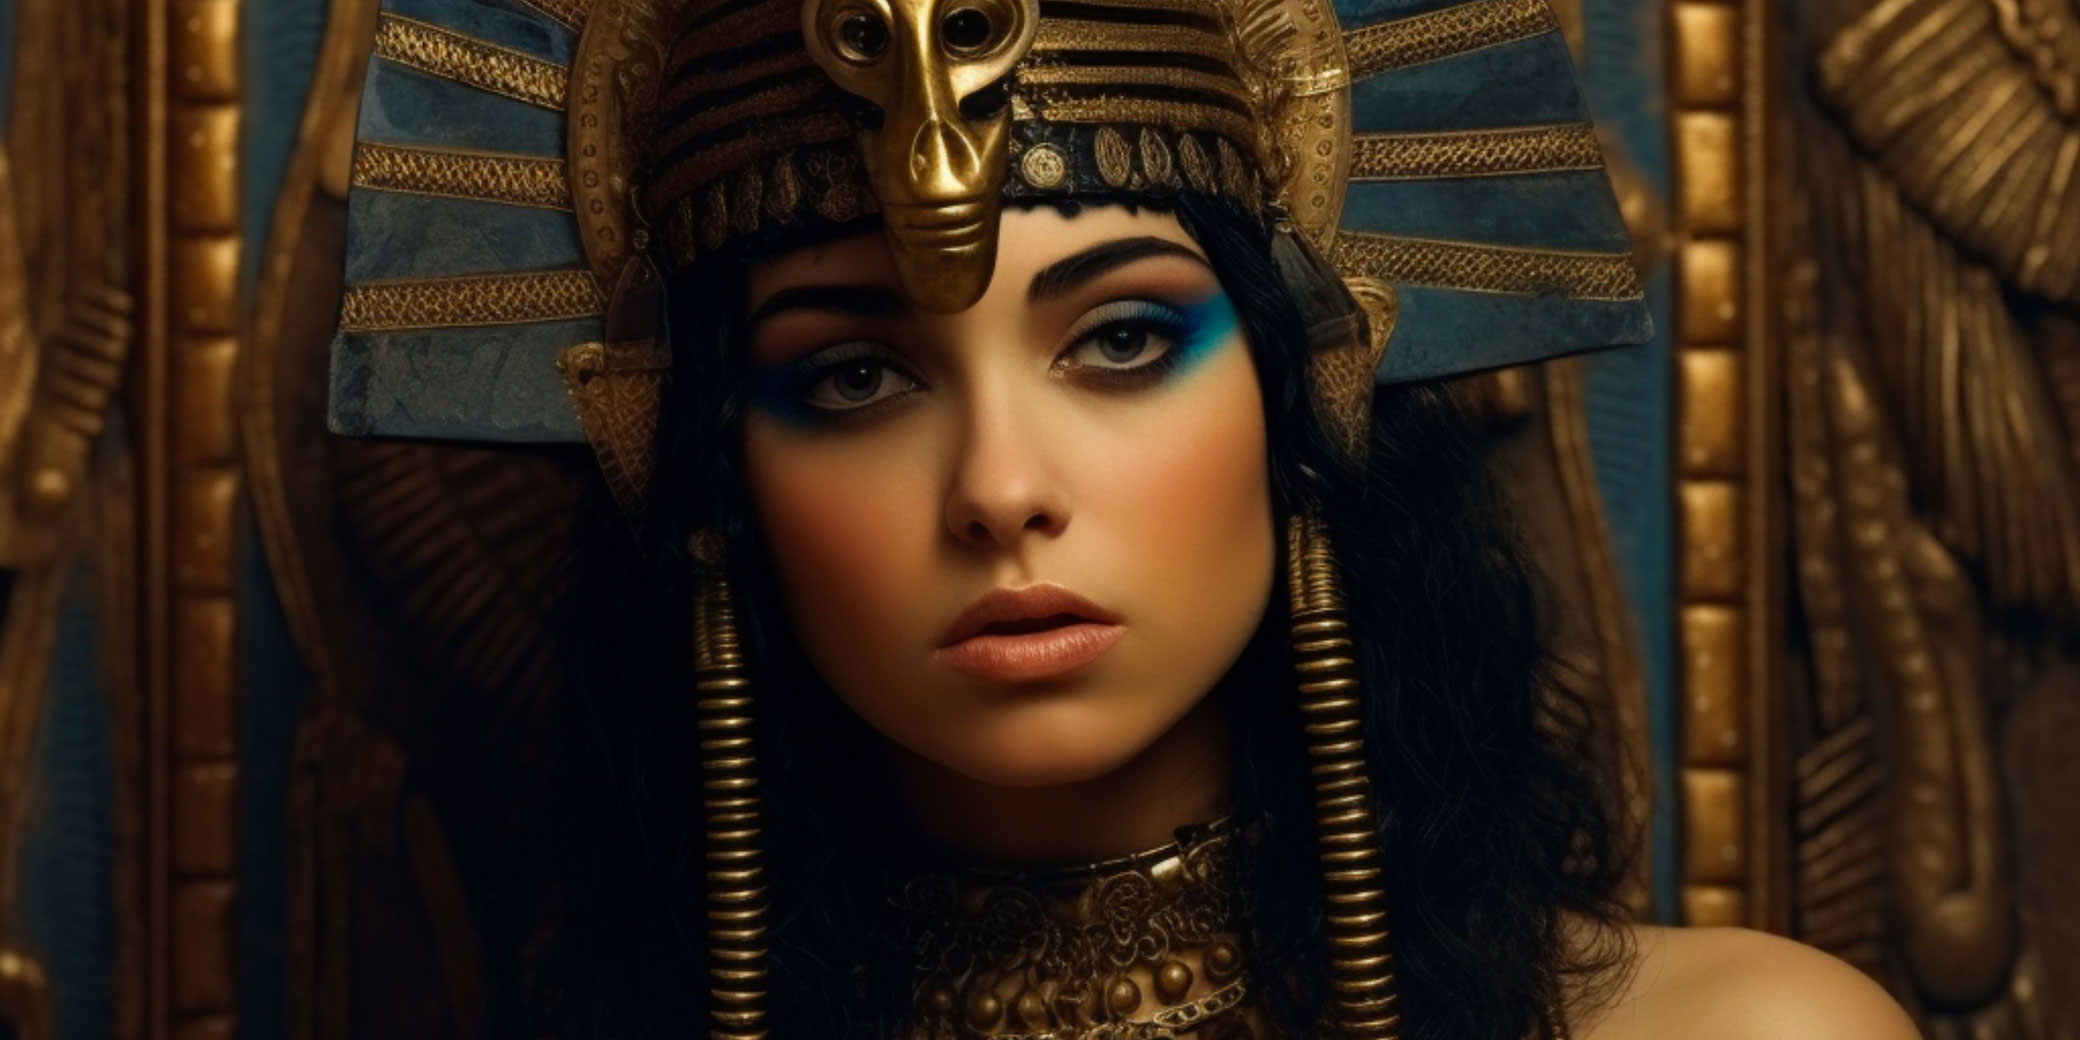 Cleopatra is not dead